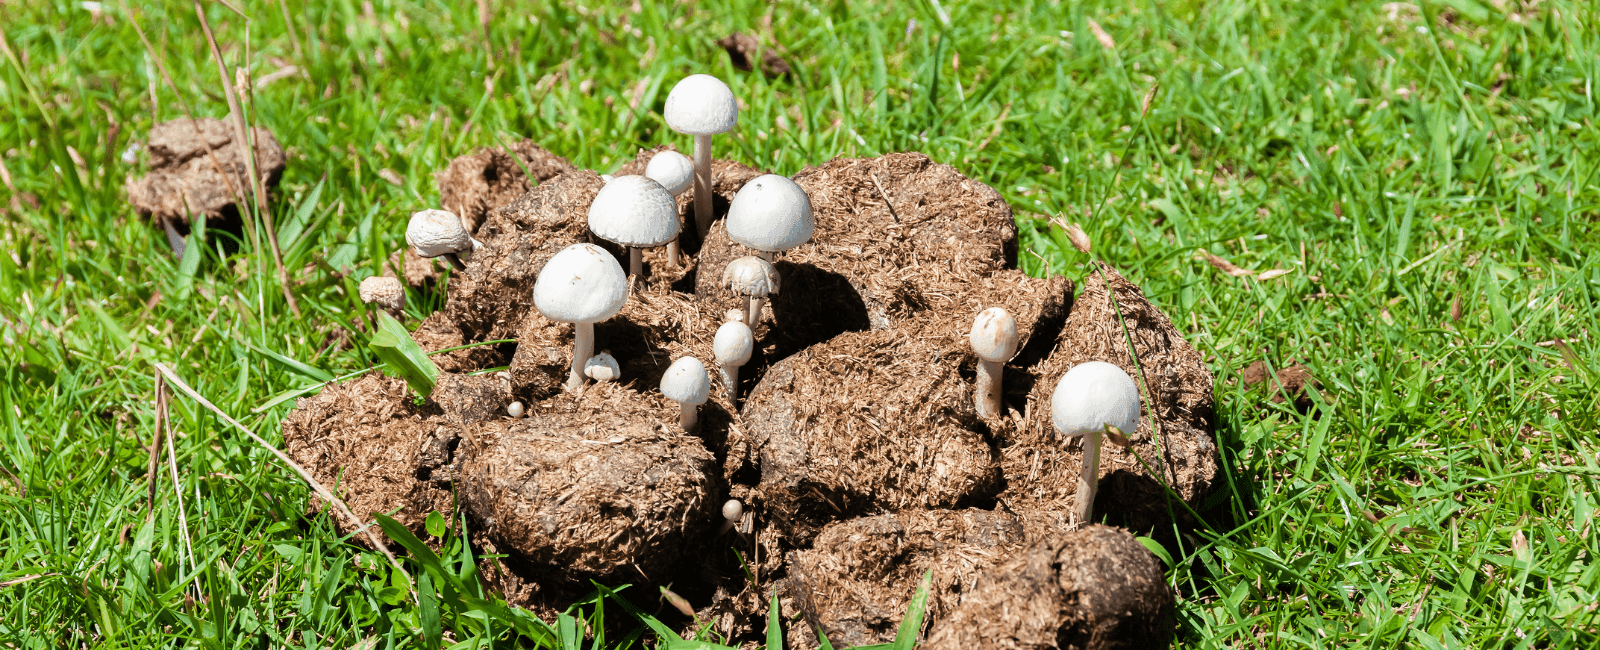 Mushrooms in Manure: A Guide to Coprophilous Fungi